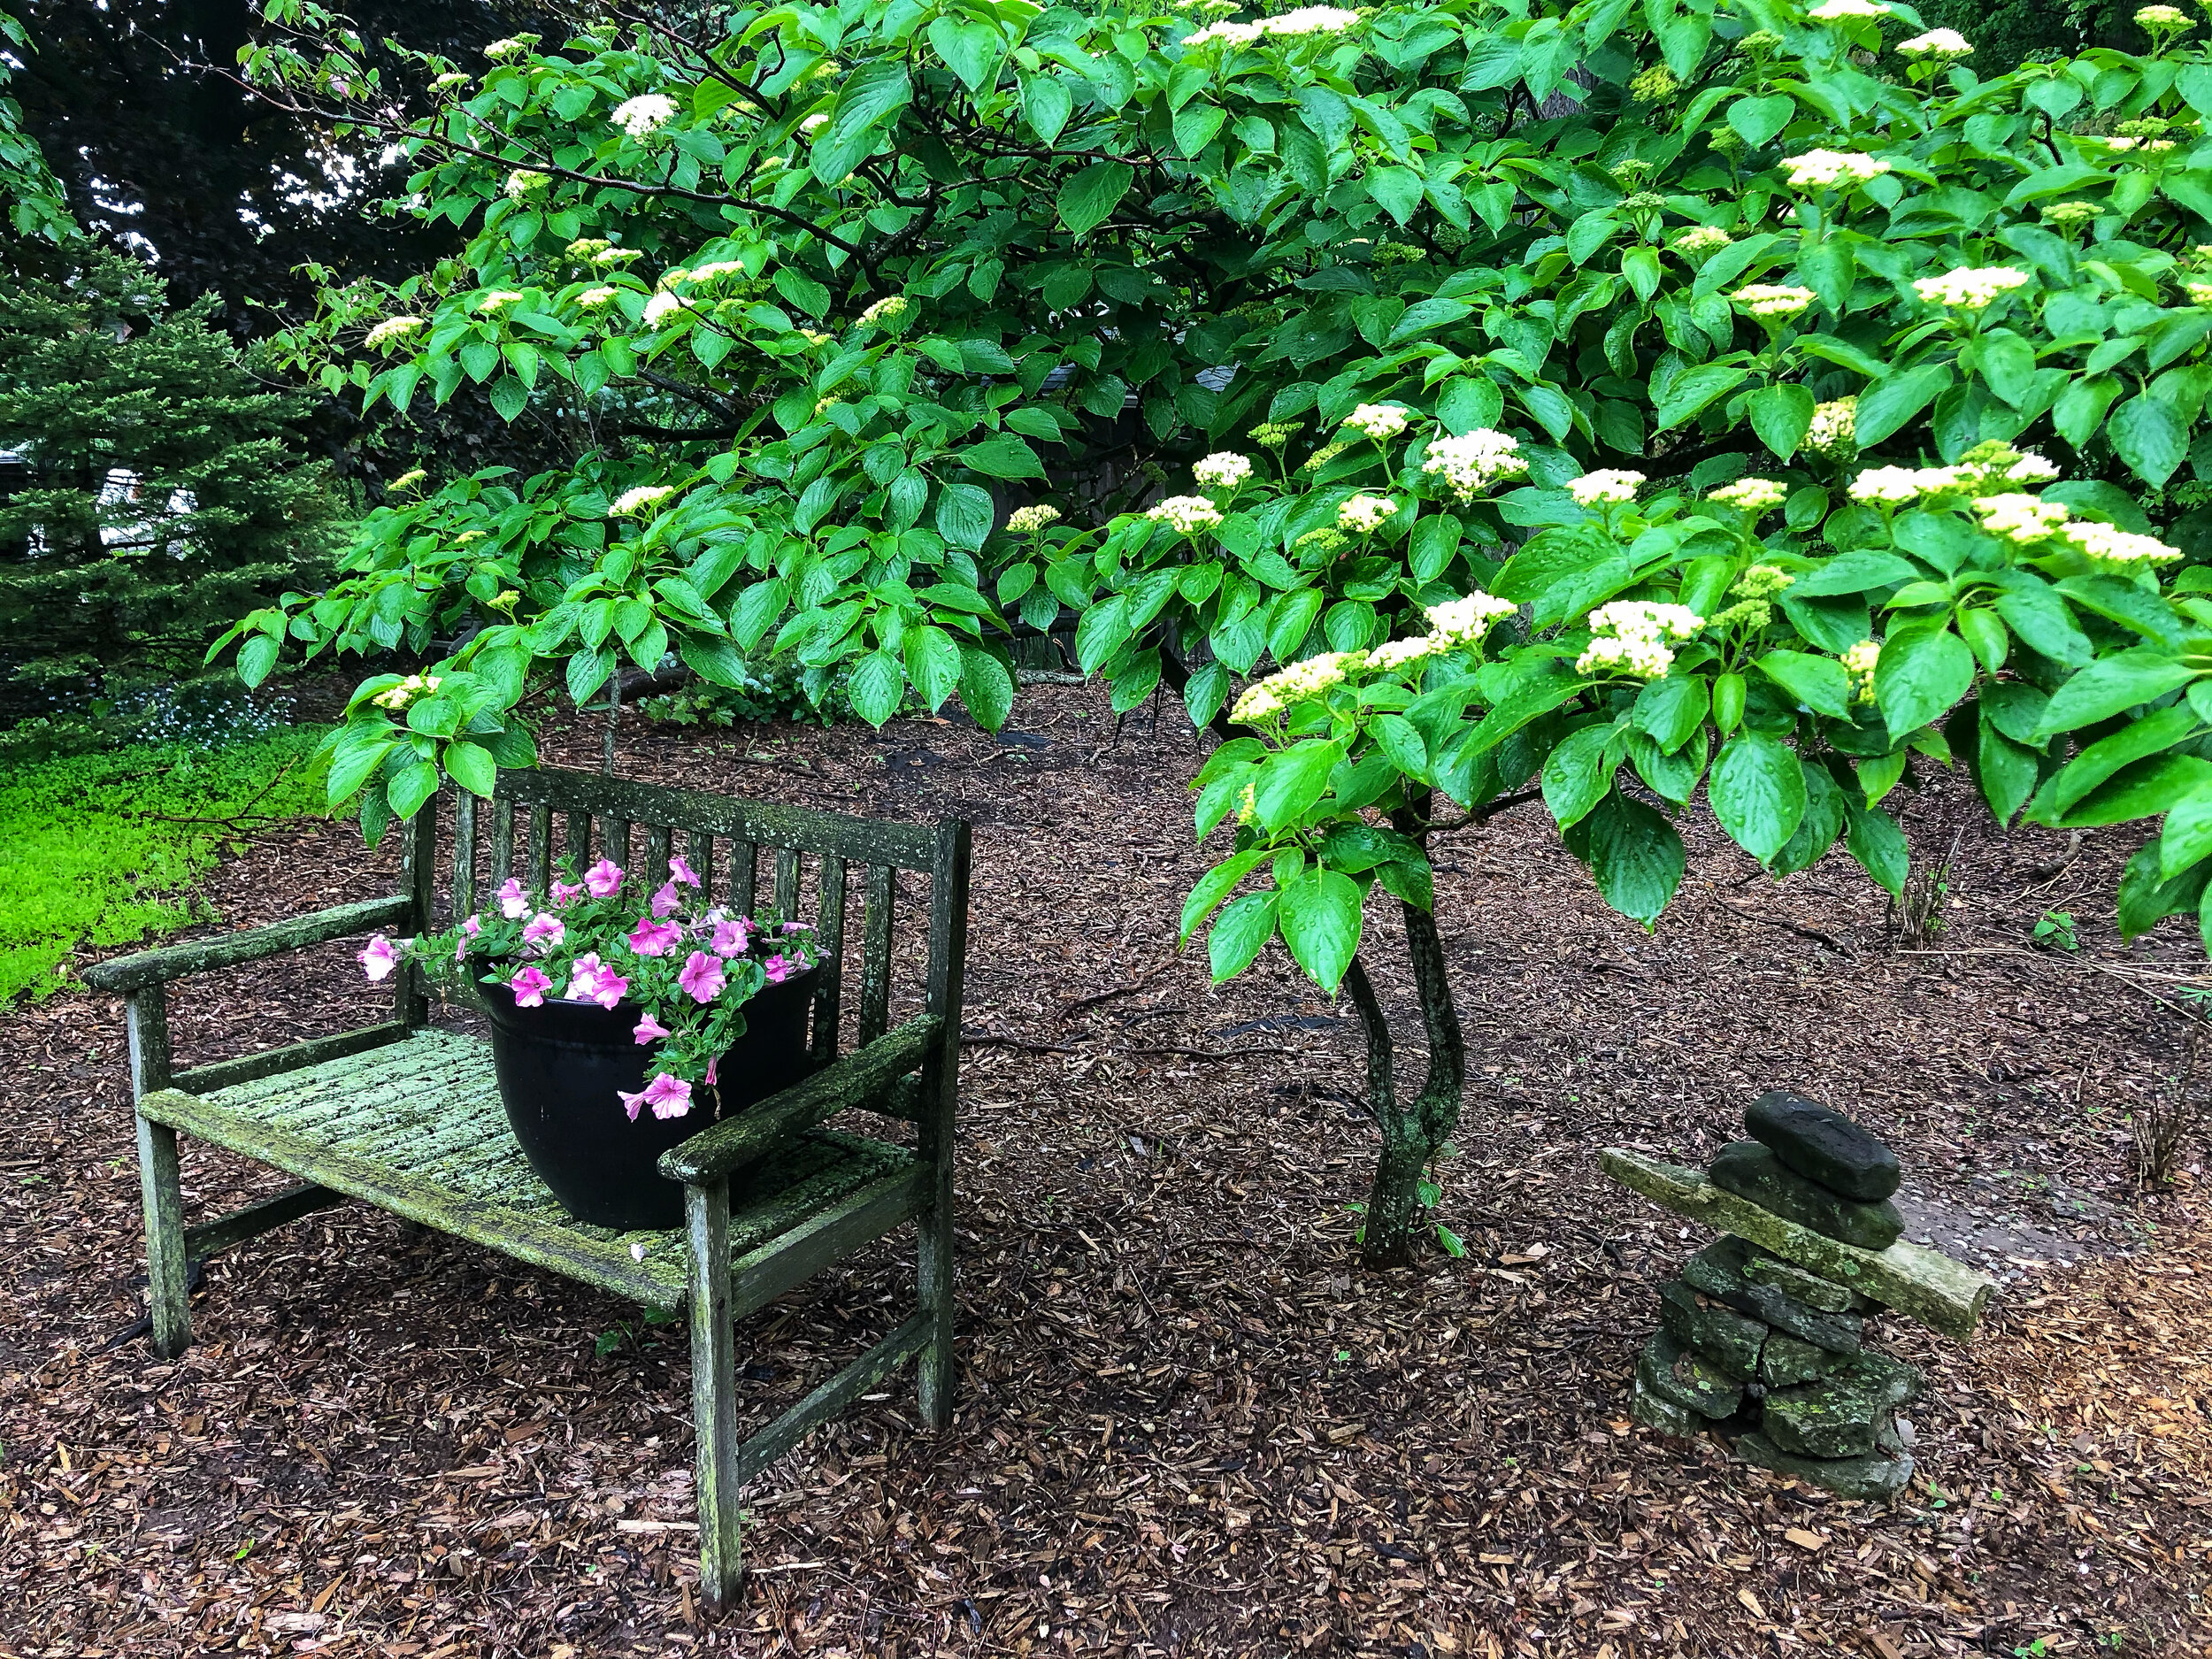 Mulch is the perfect backdrop for the foliage of this Pagoda dogwood, while it protects and insulates the soil below. Over time it breaks down and adds a woodsy organic material to the soil.